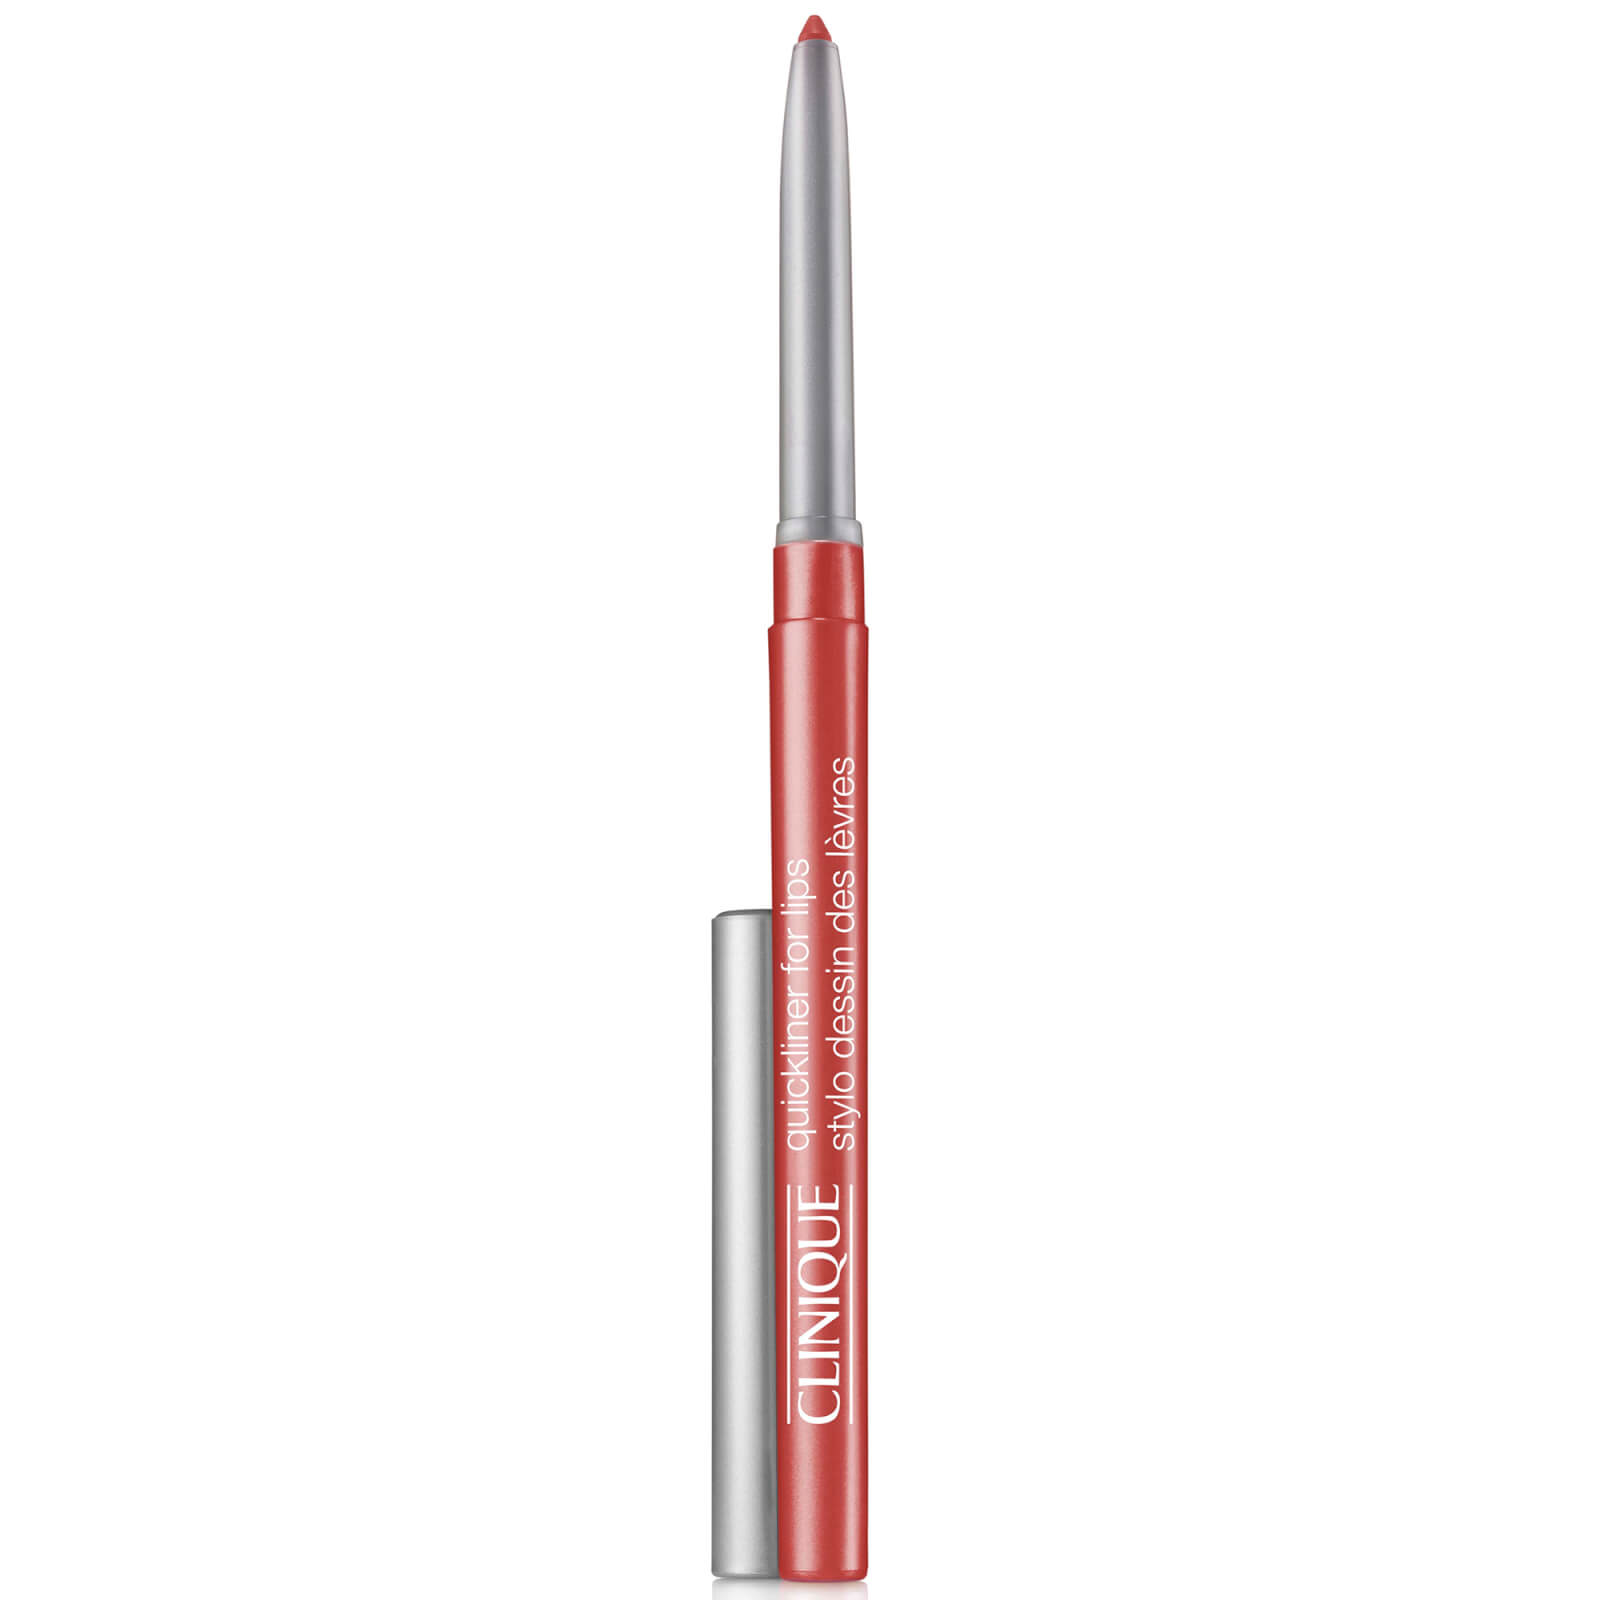 Clinique Quickliner for Lips 0.3g (Various Shades) - Intense Cayenne